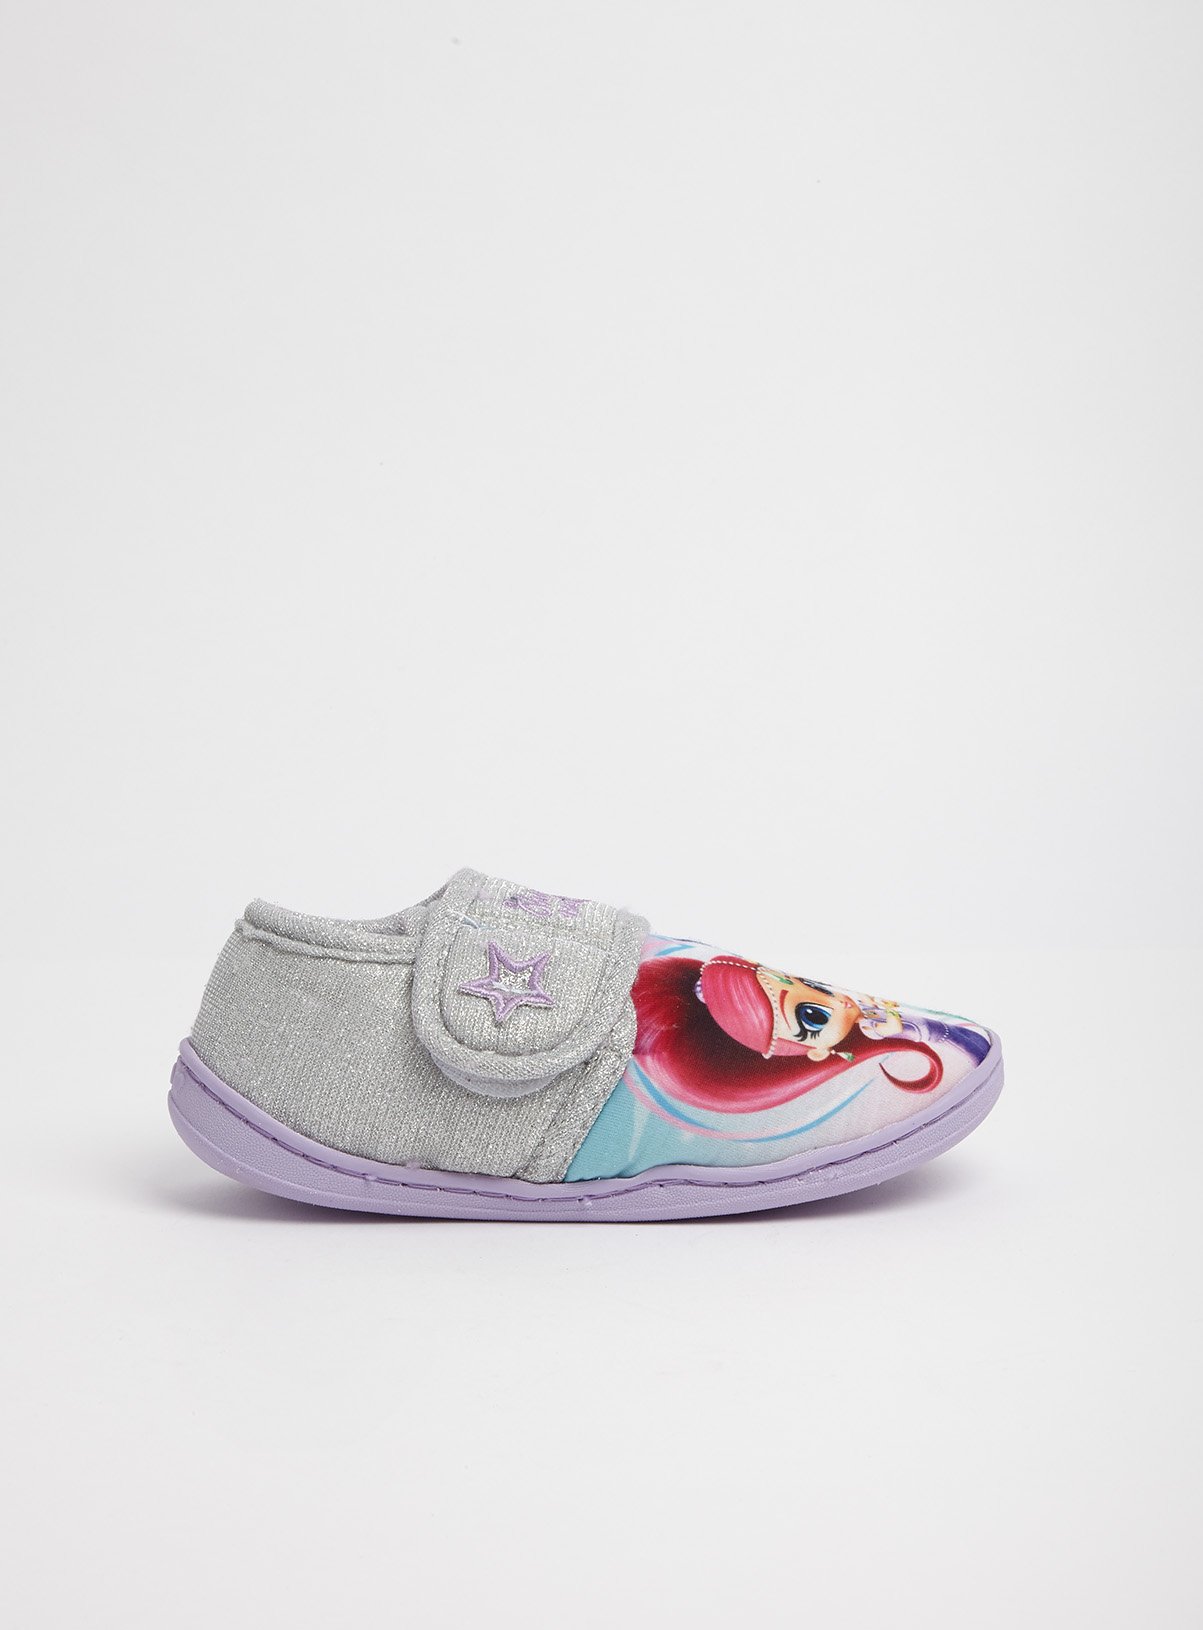 Shimmer & Shine Cupsole Slippers Review